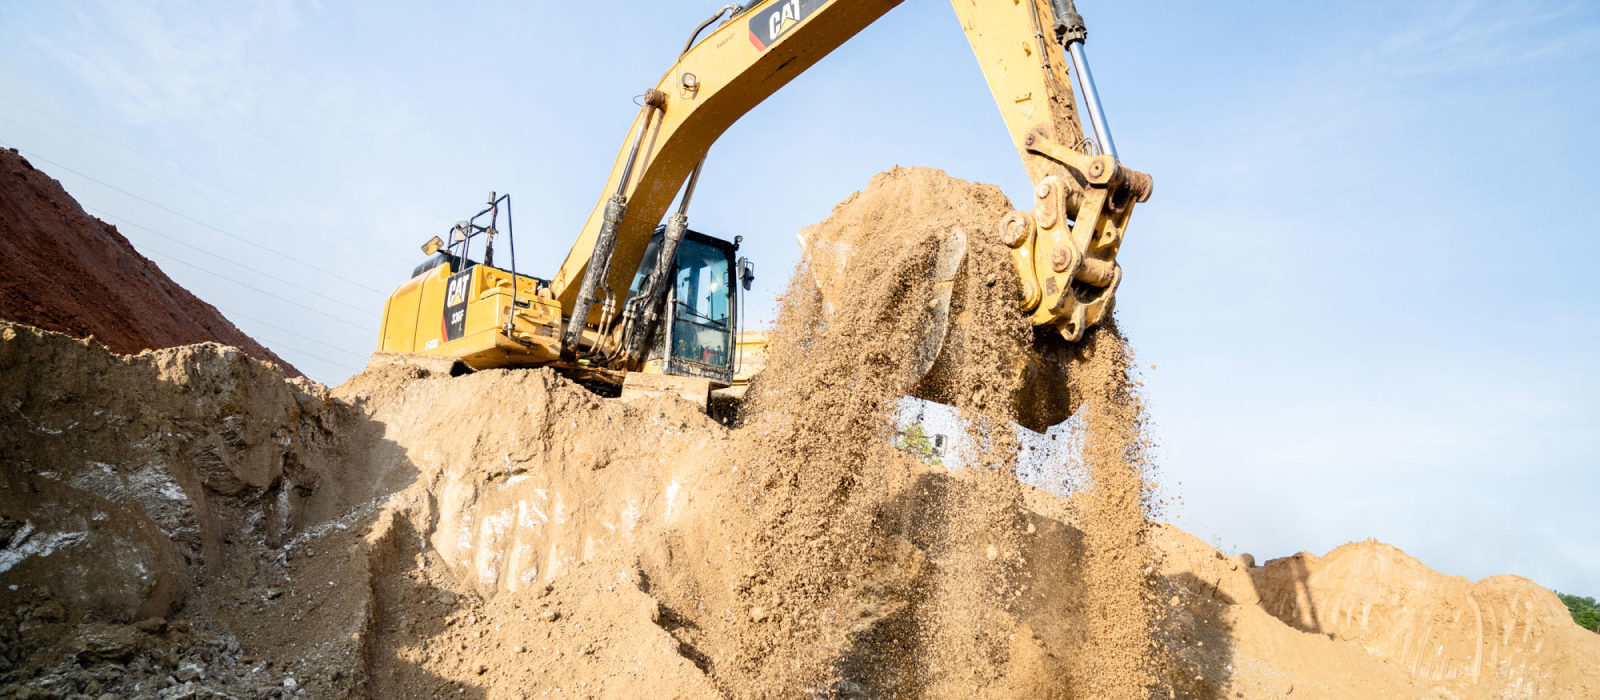 Cat 349f In Action At Mass Excavation Job Site